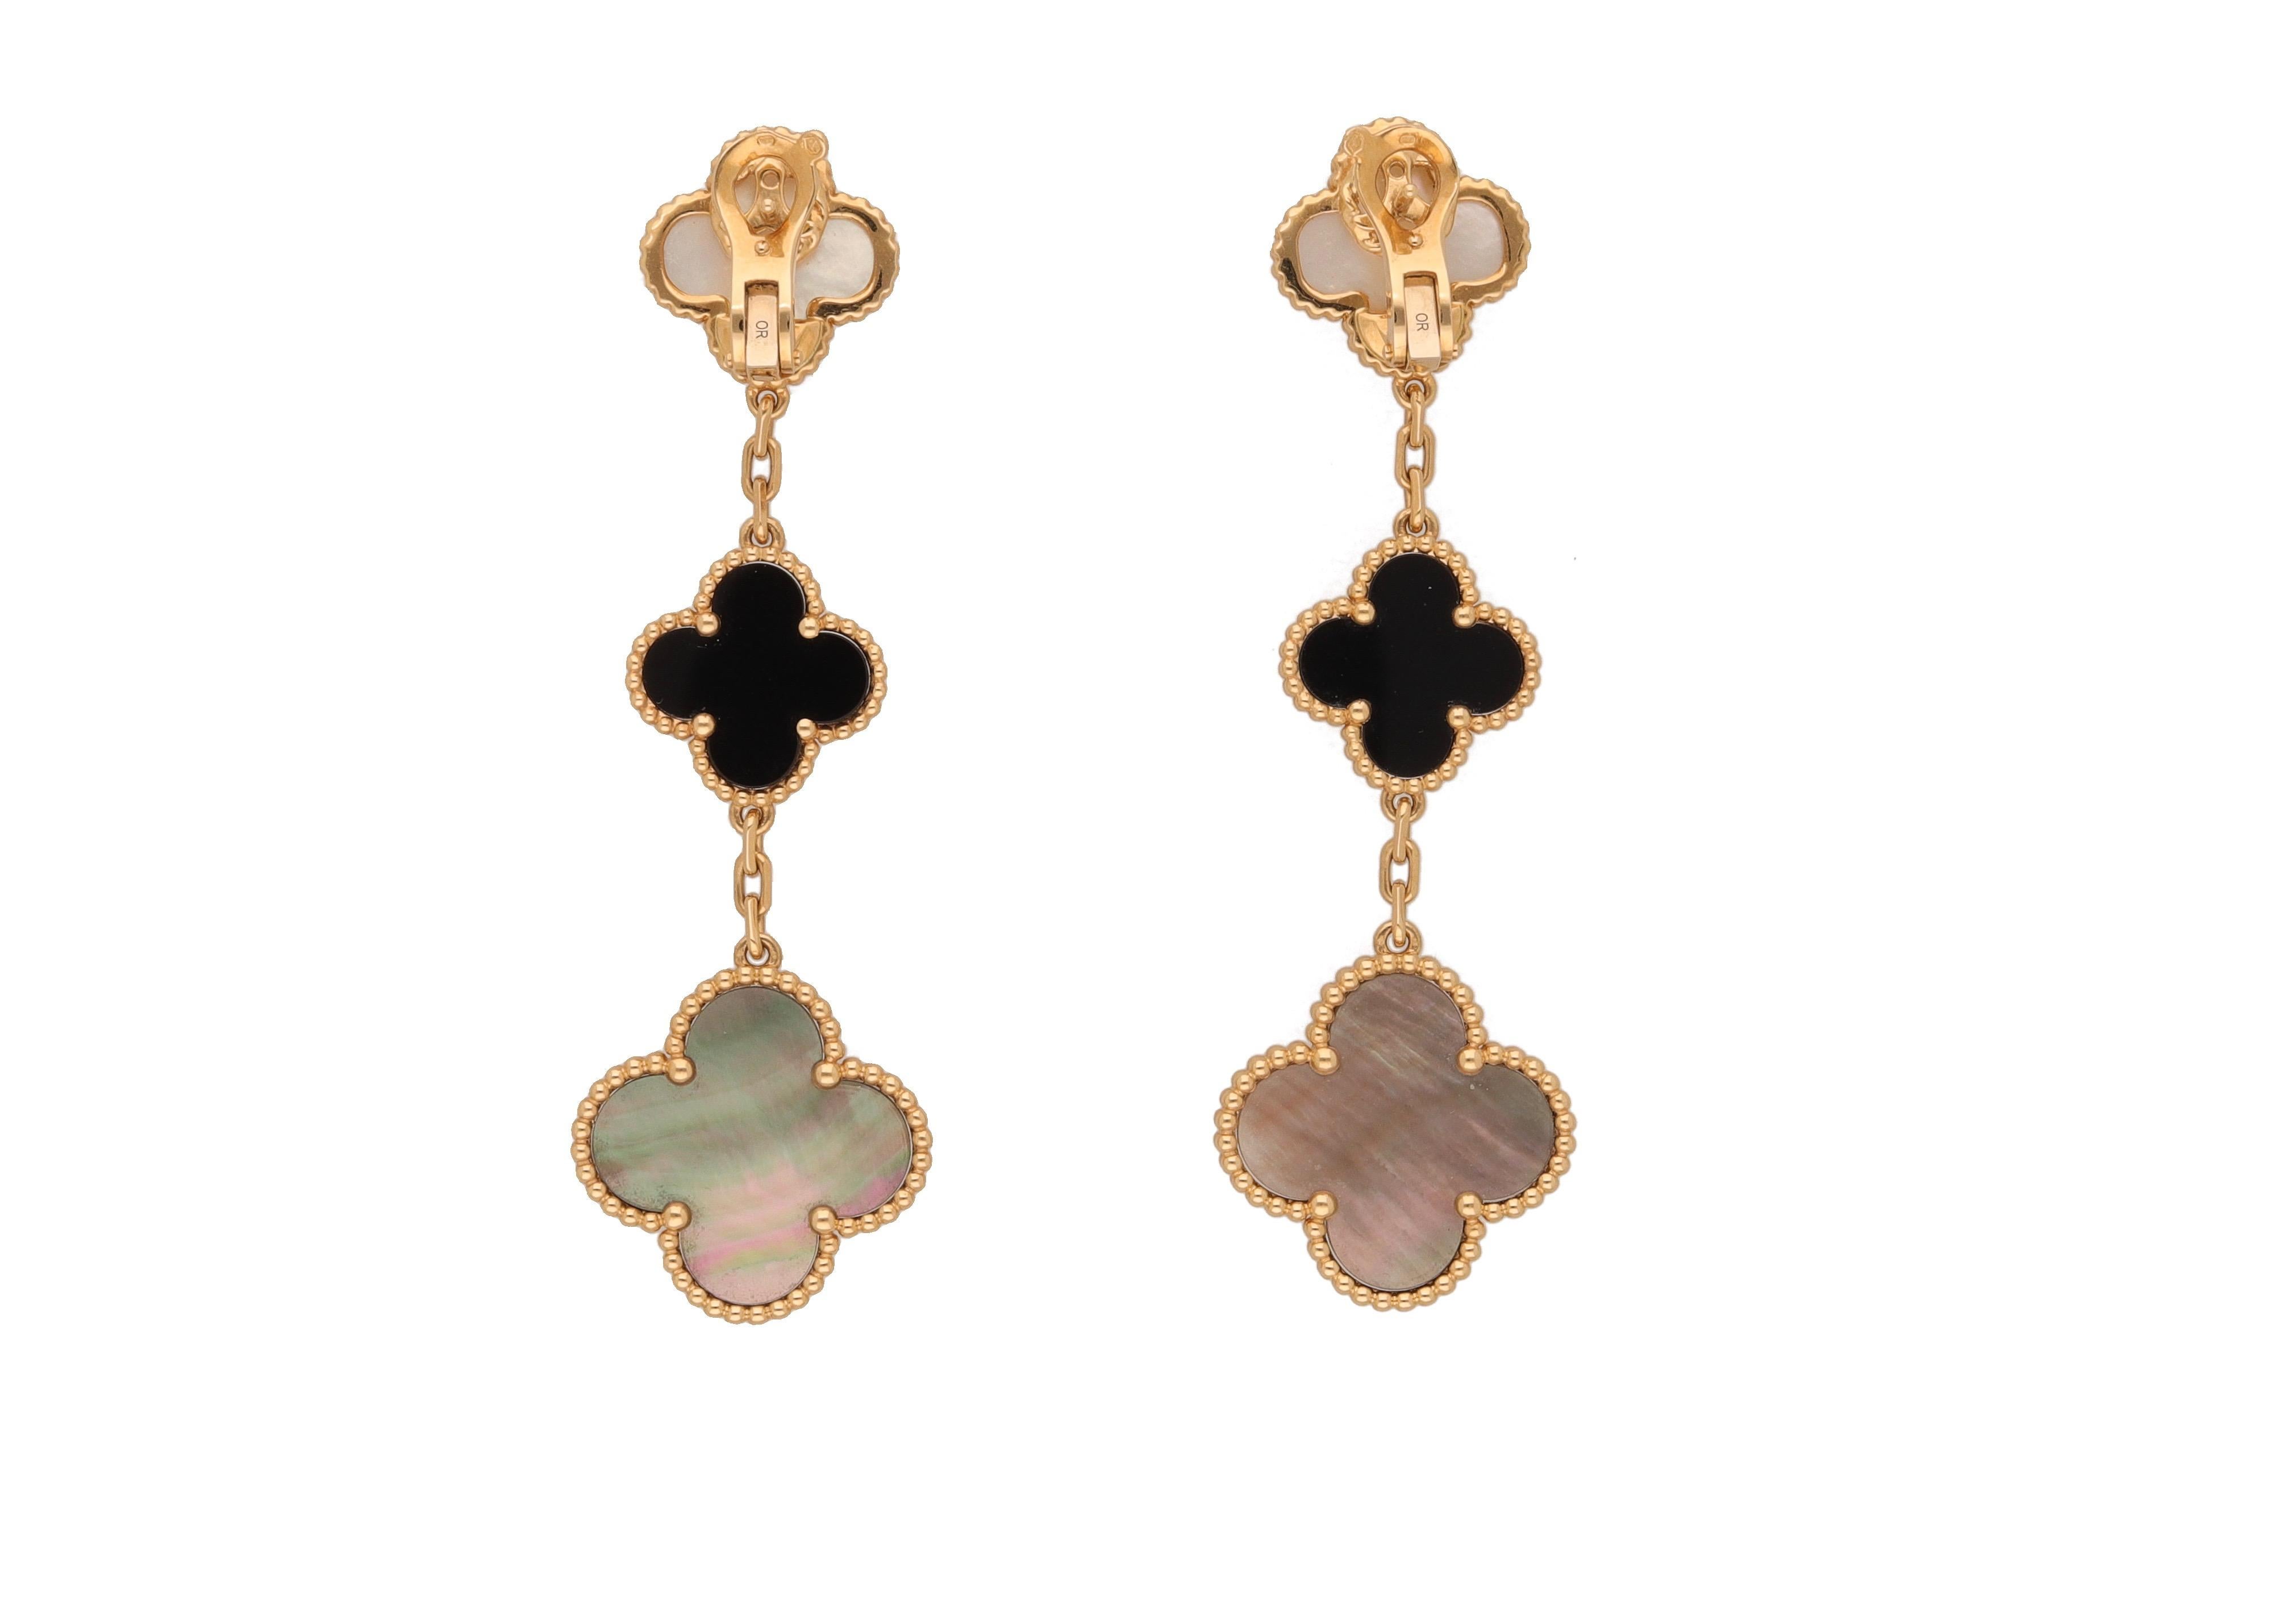 18 kt. yellow gold earrings signed by Van Cleef & Arpels.
This icon pair of earrings is designed with 3 flowers made of white and grey mother of pearl and onyx.
Comes with the original box.
2010 ca.
The length is 6,8 cm.